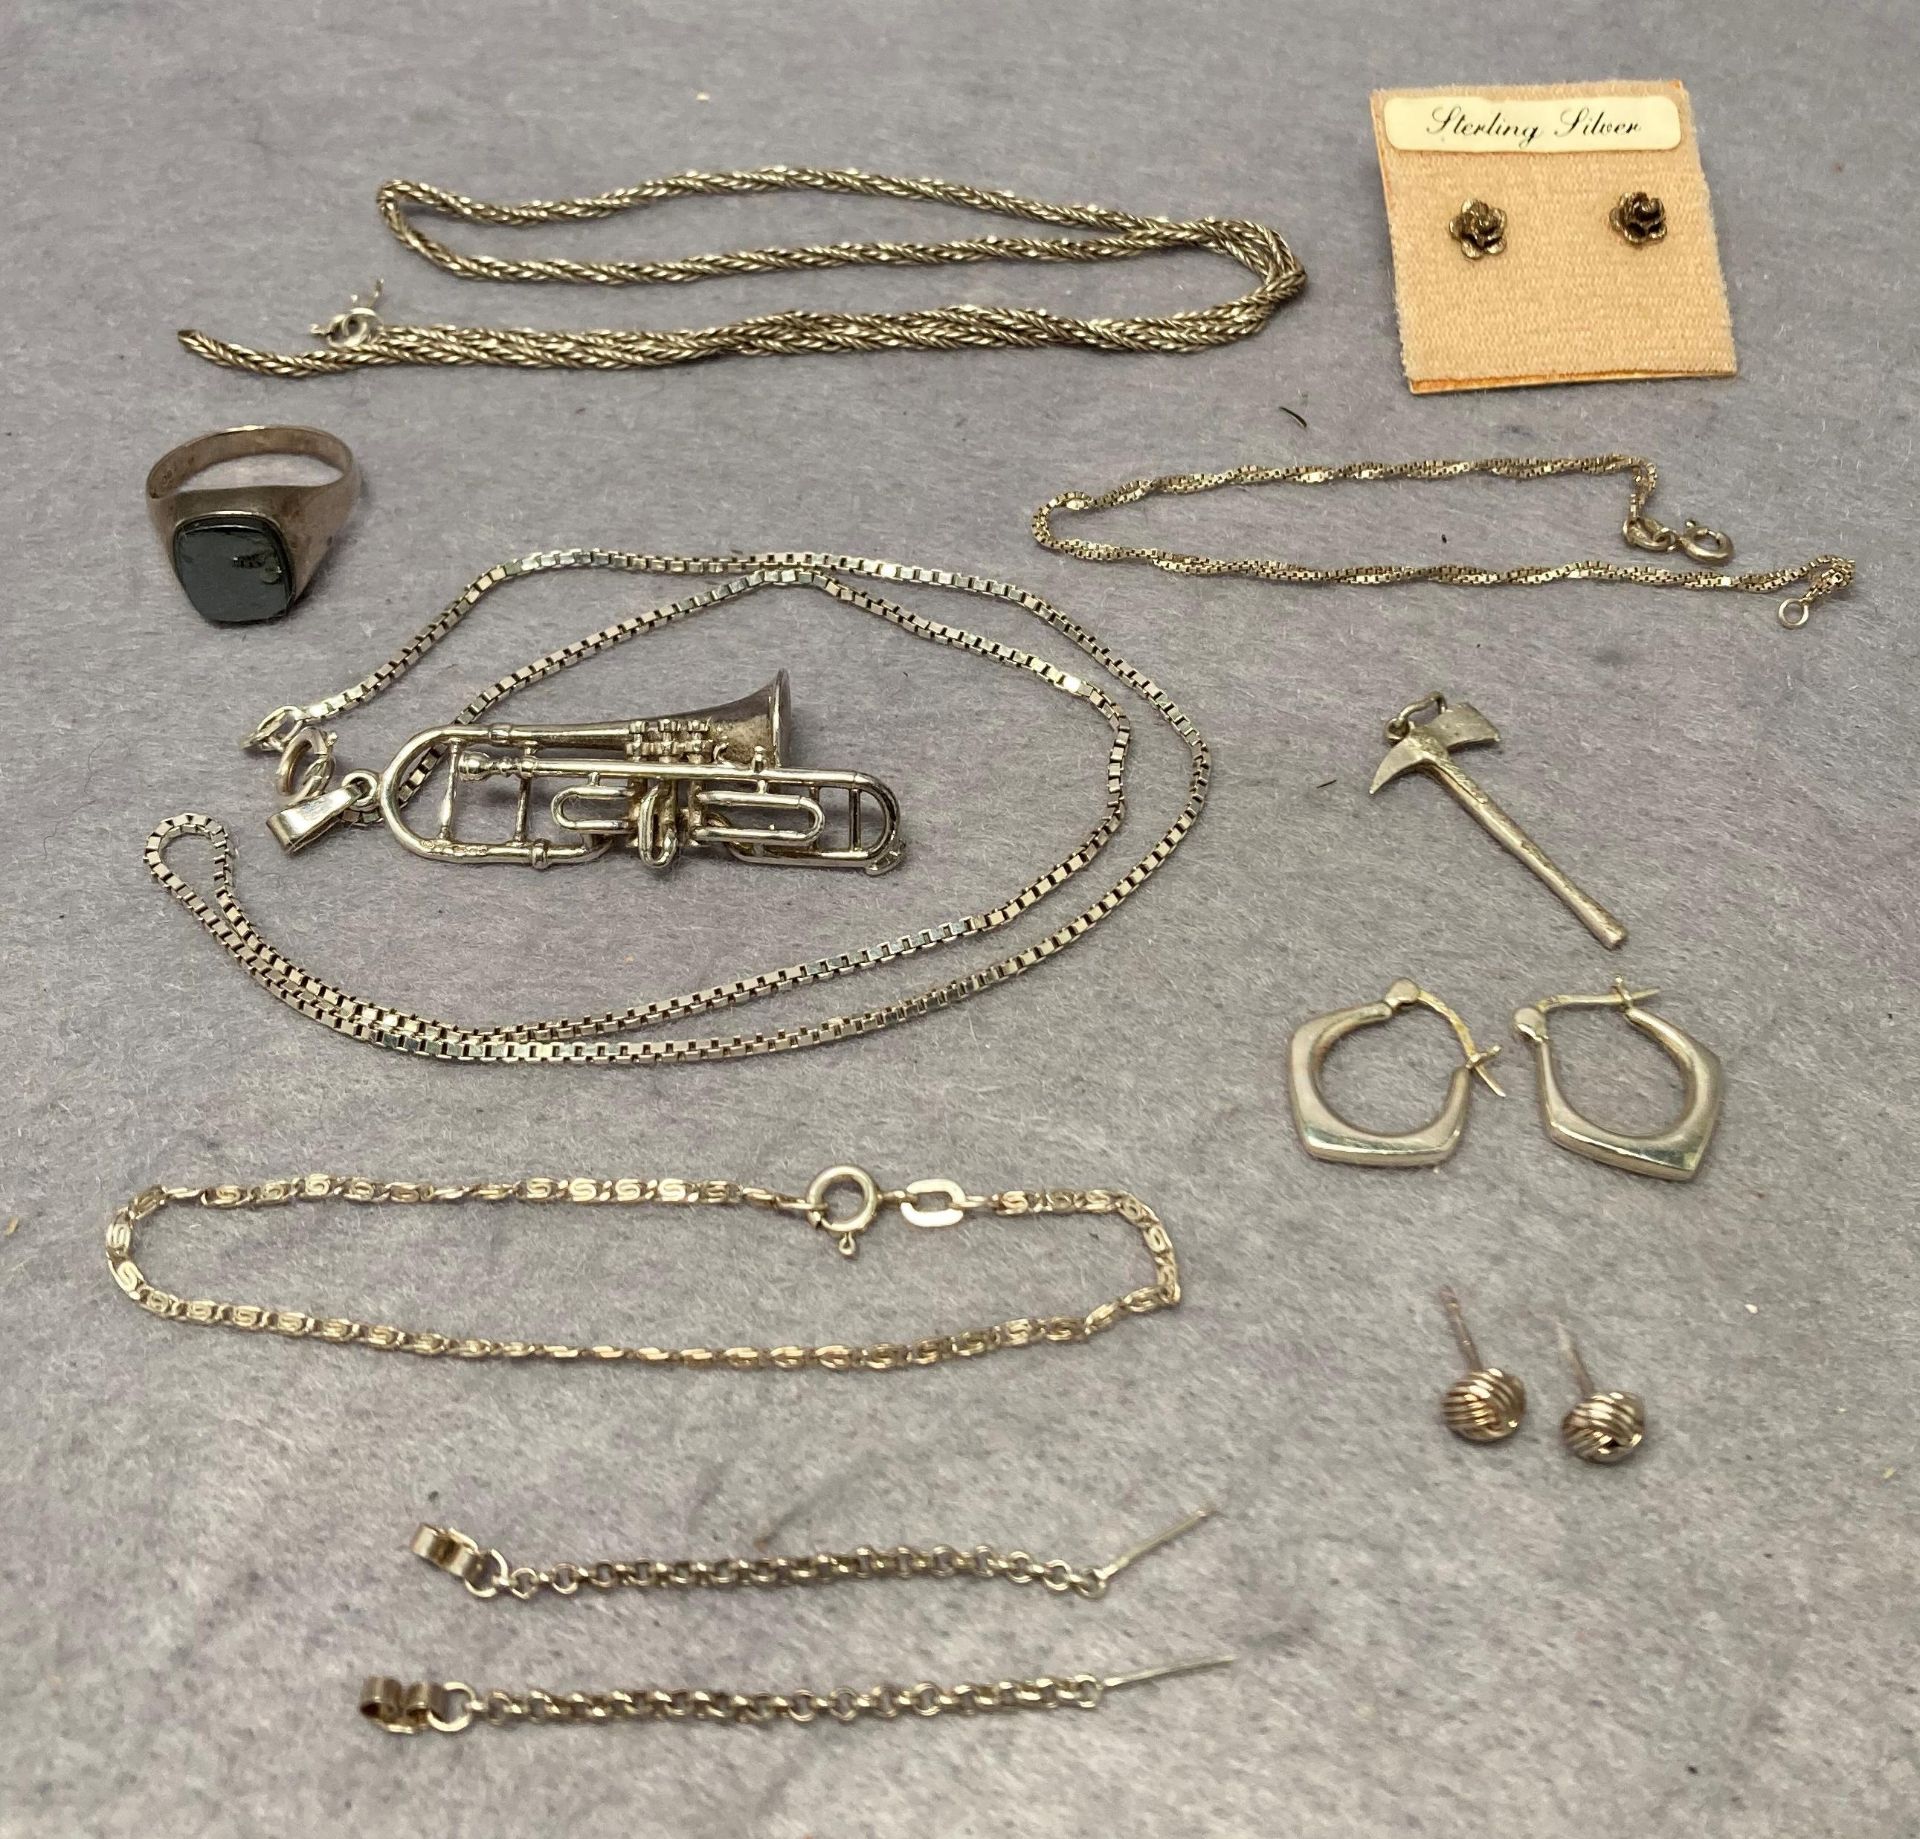 Contents to box - assorted Sterling Silver (.